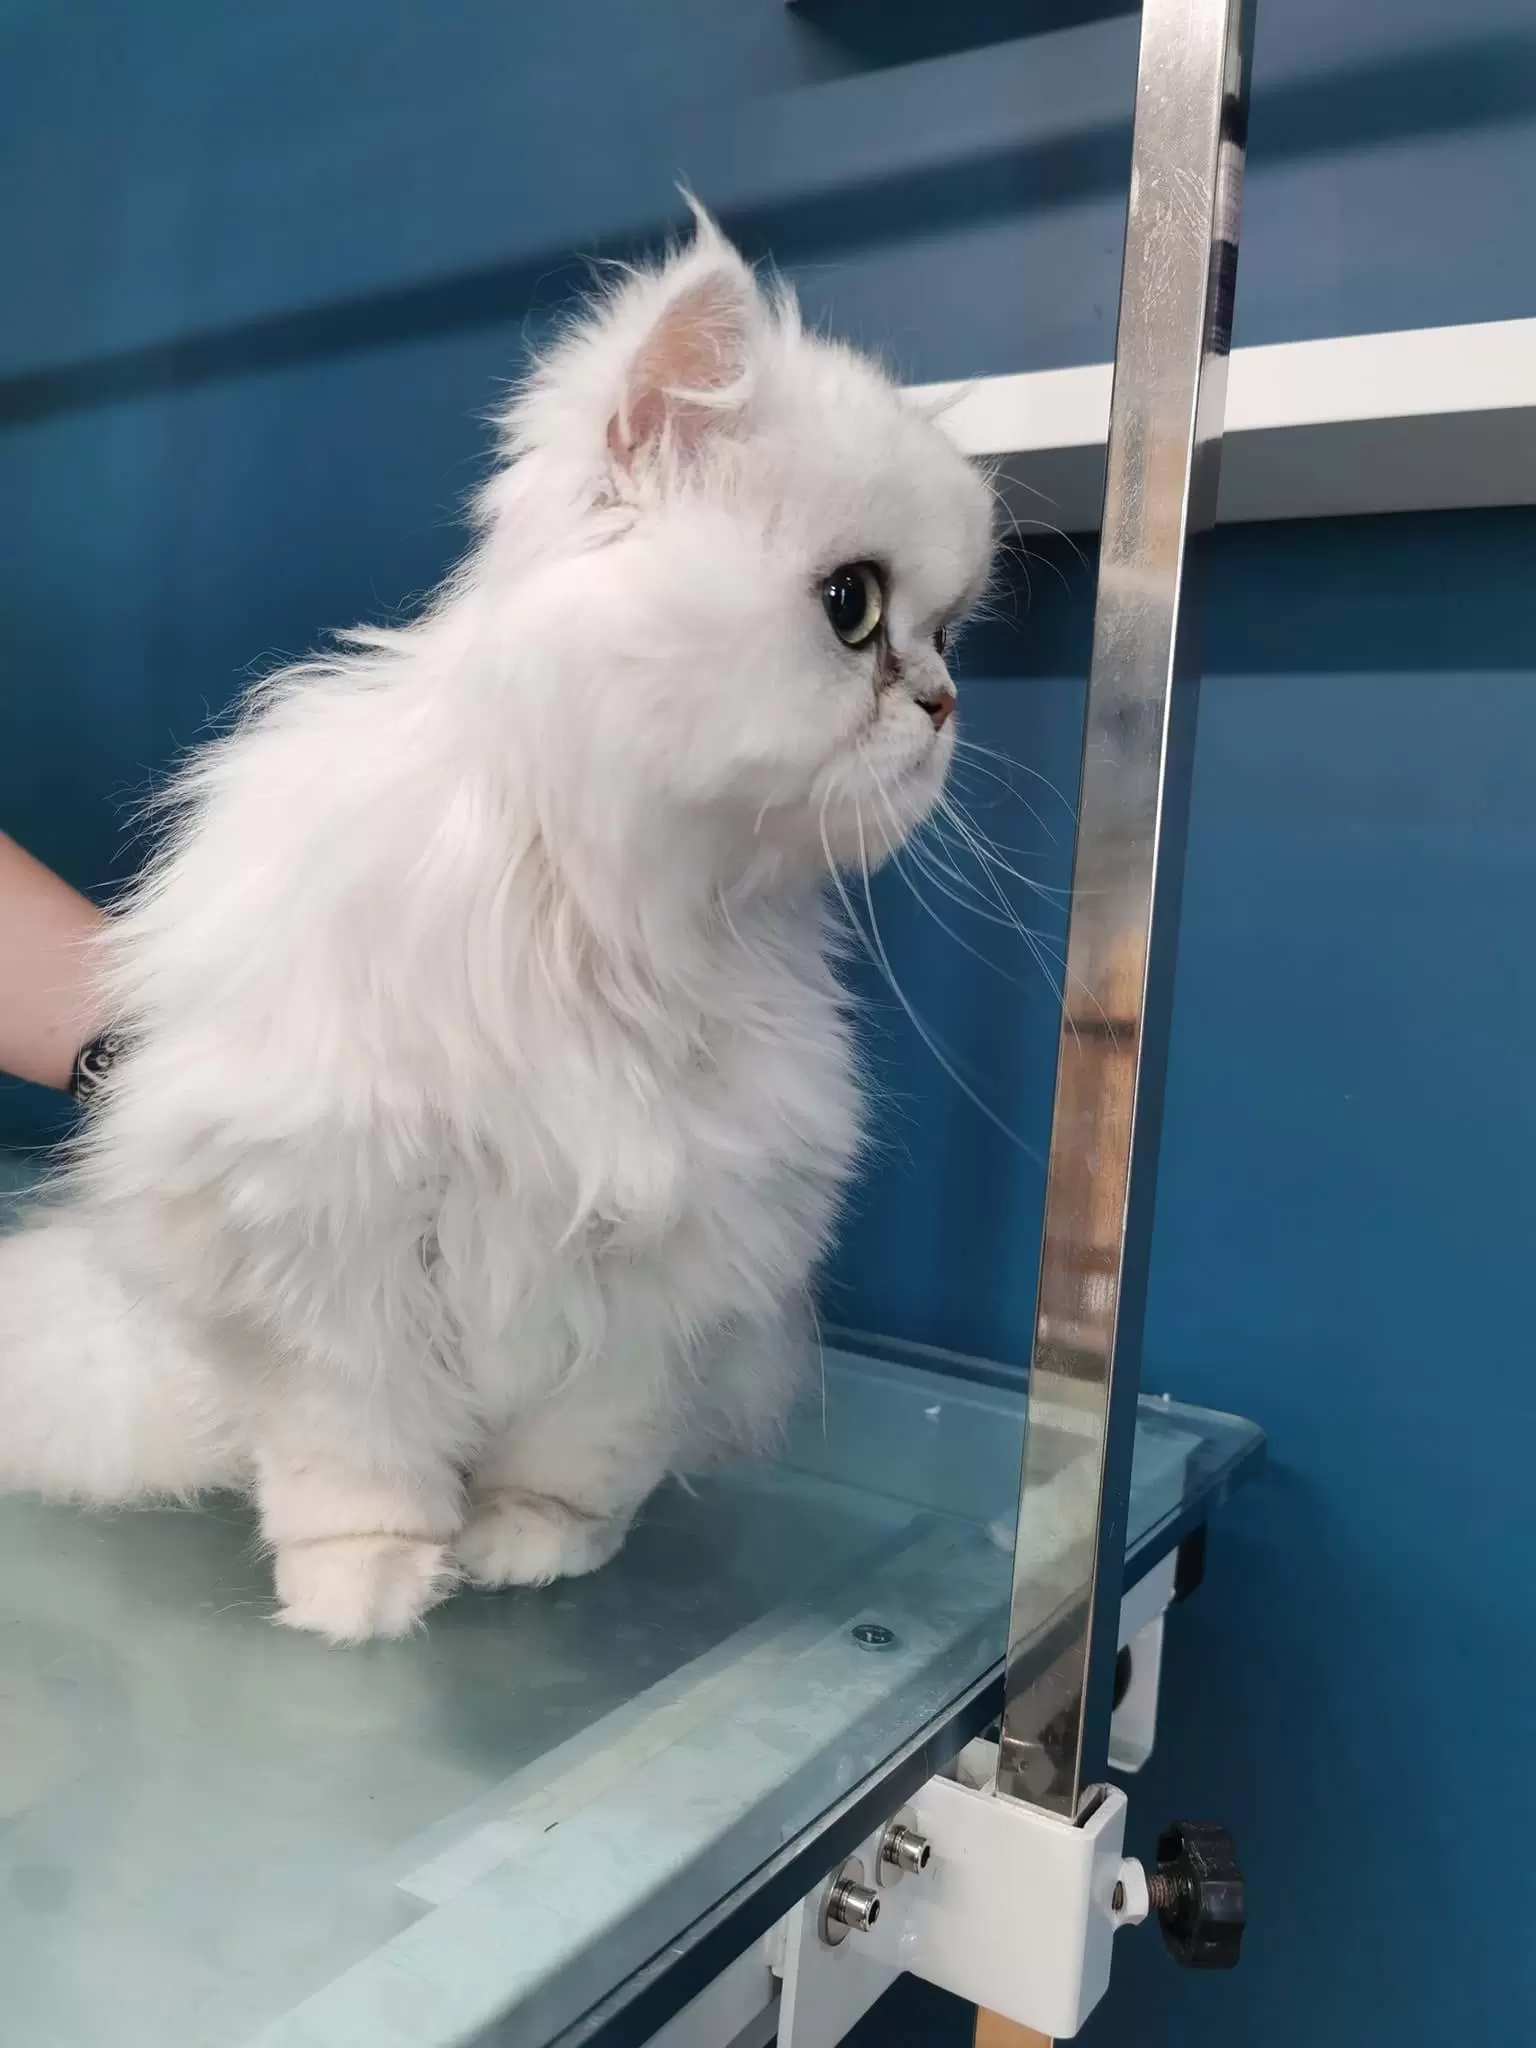 Small White Cat that is sitting on the grooming table